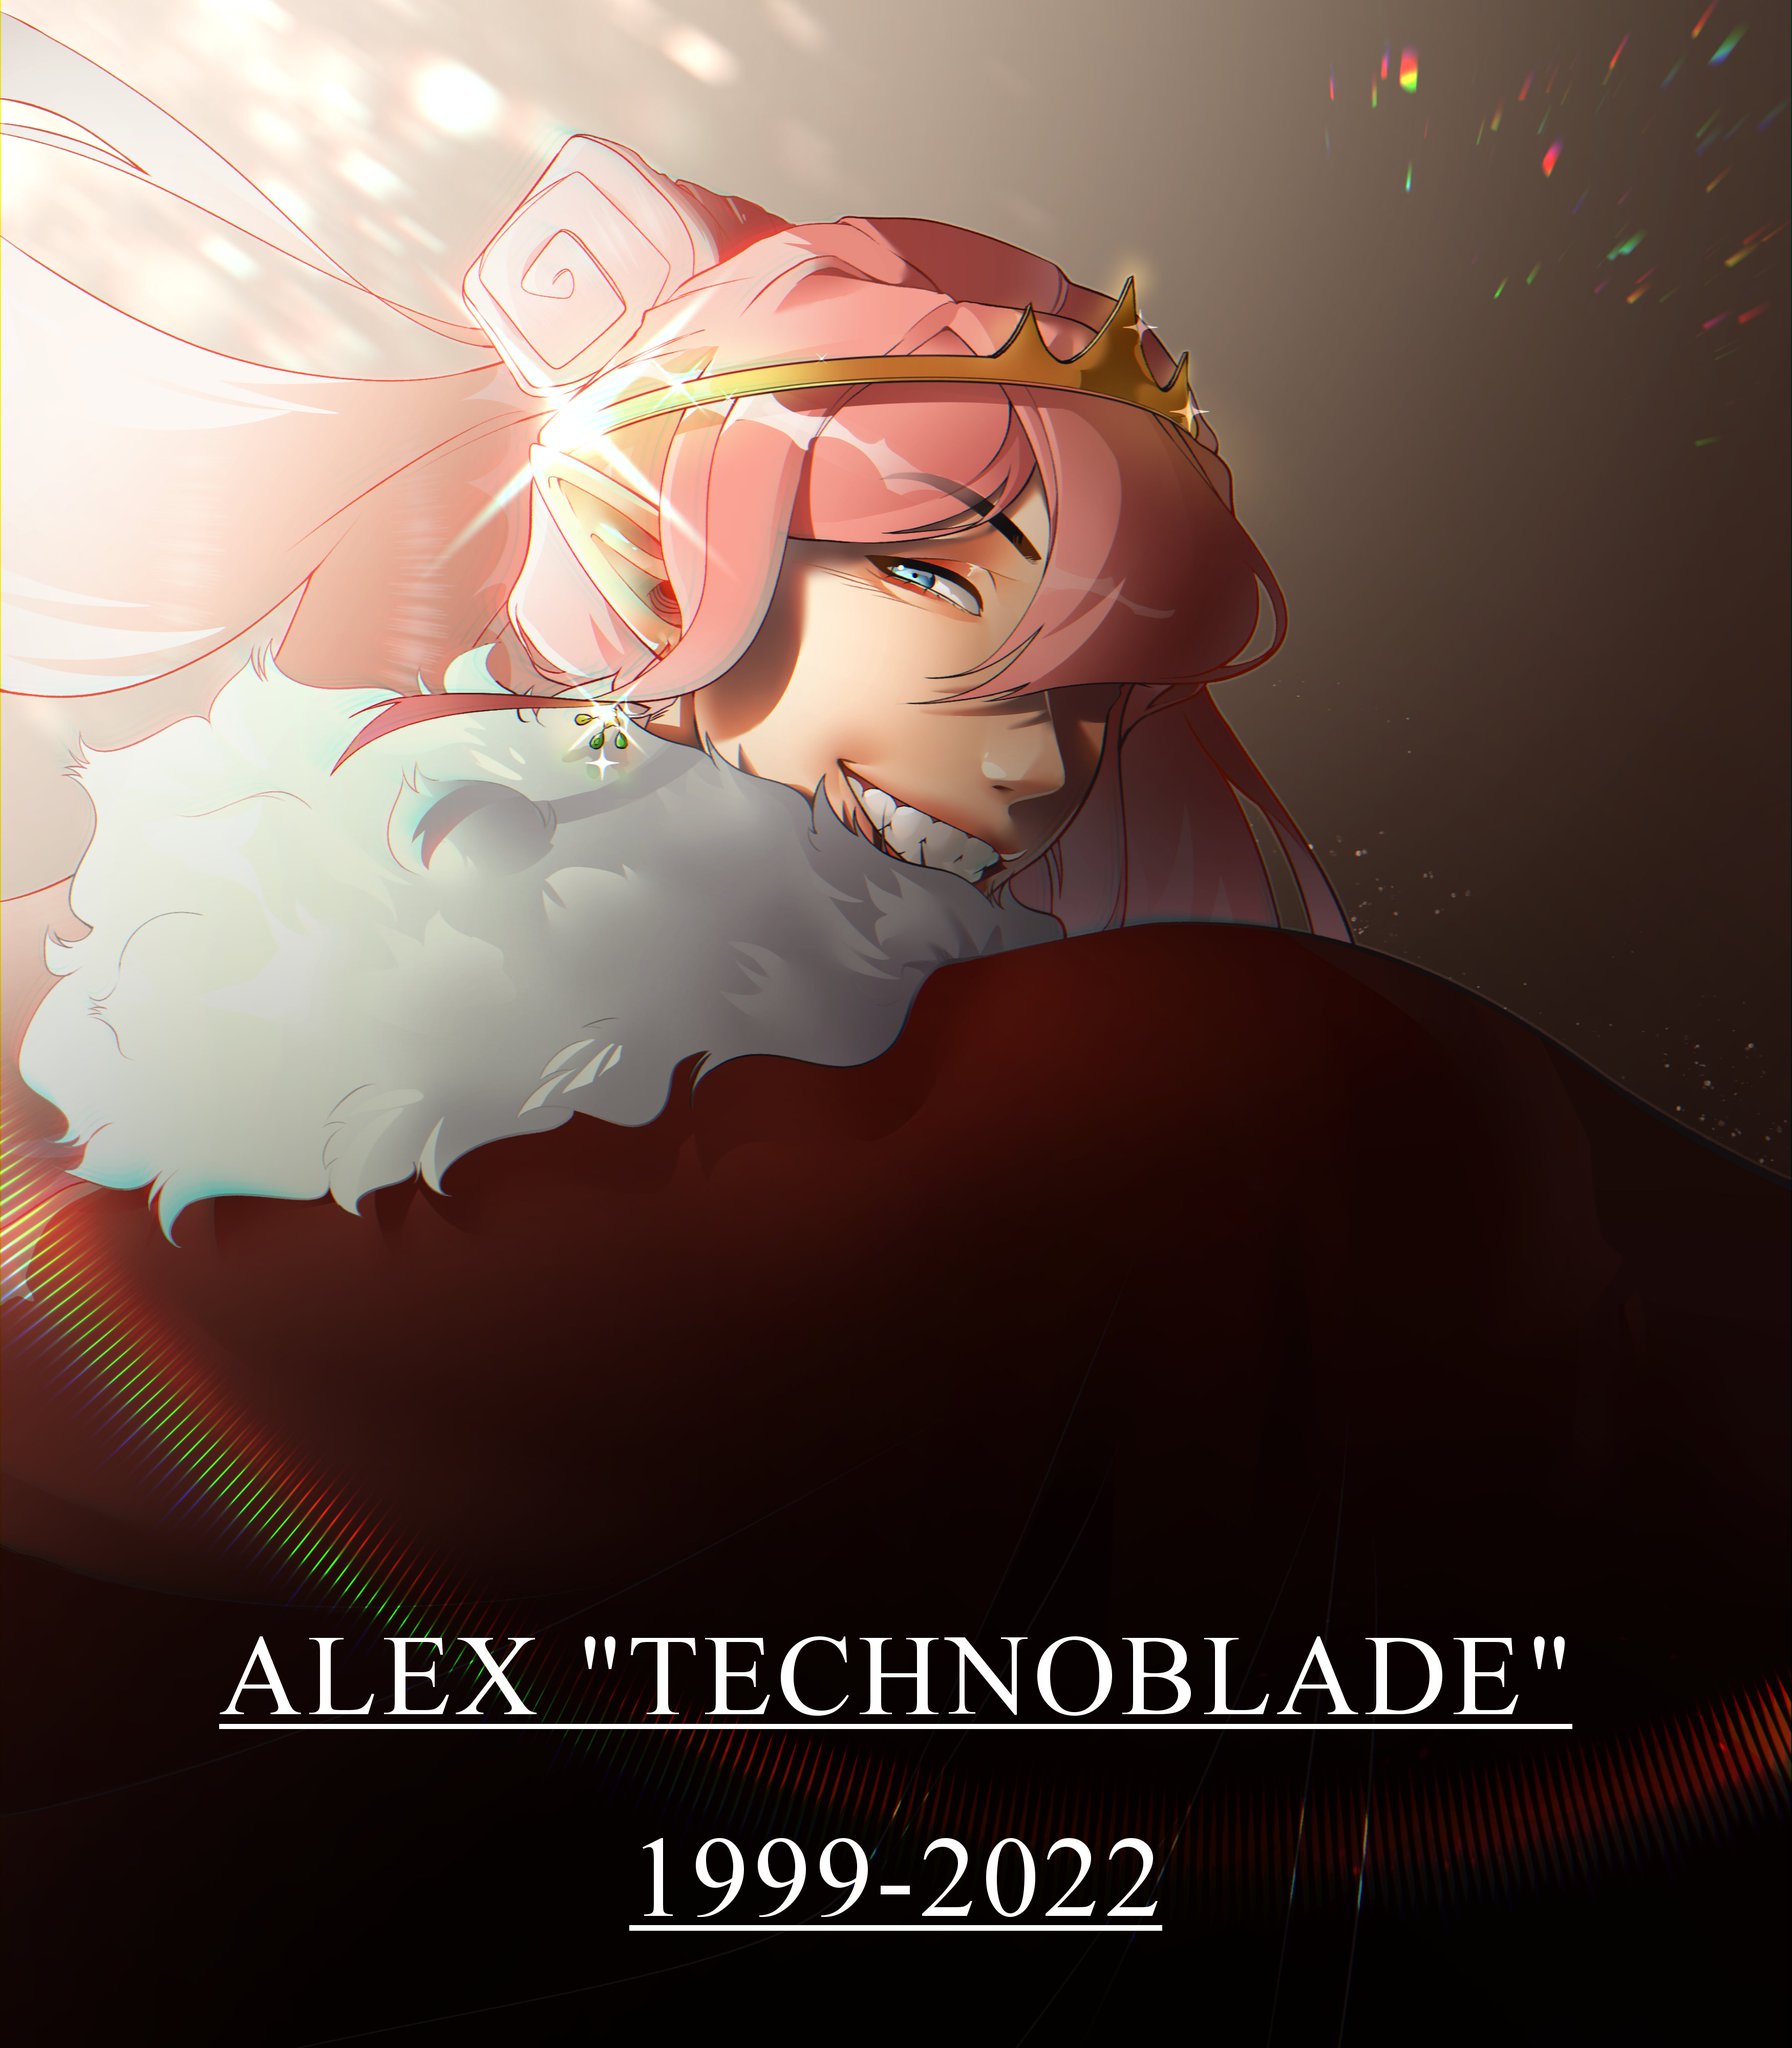 wtchysvto🇺🇦 on X: rest well, king. technoblade never dies  #goodbyetechnoblade #technoblade #technlobladefanart   / X